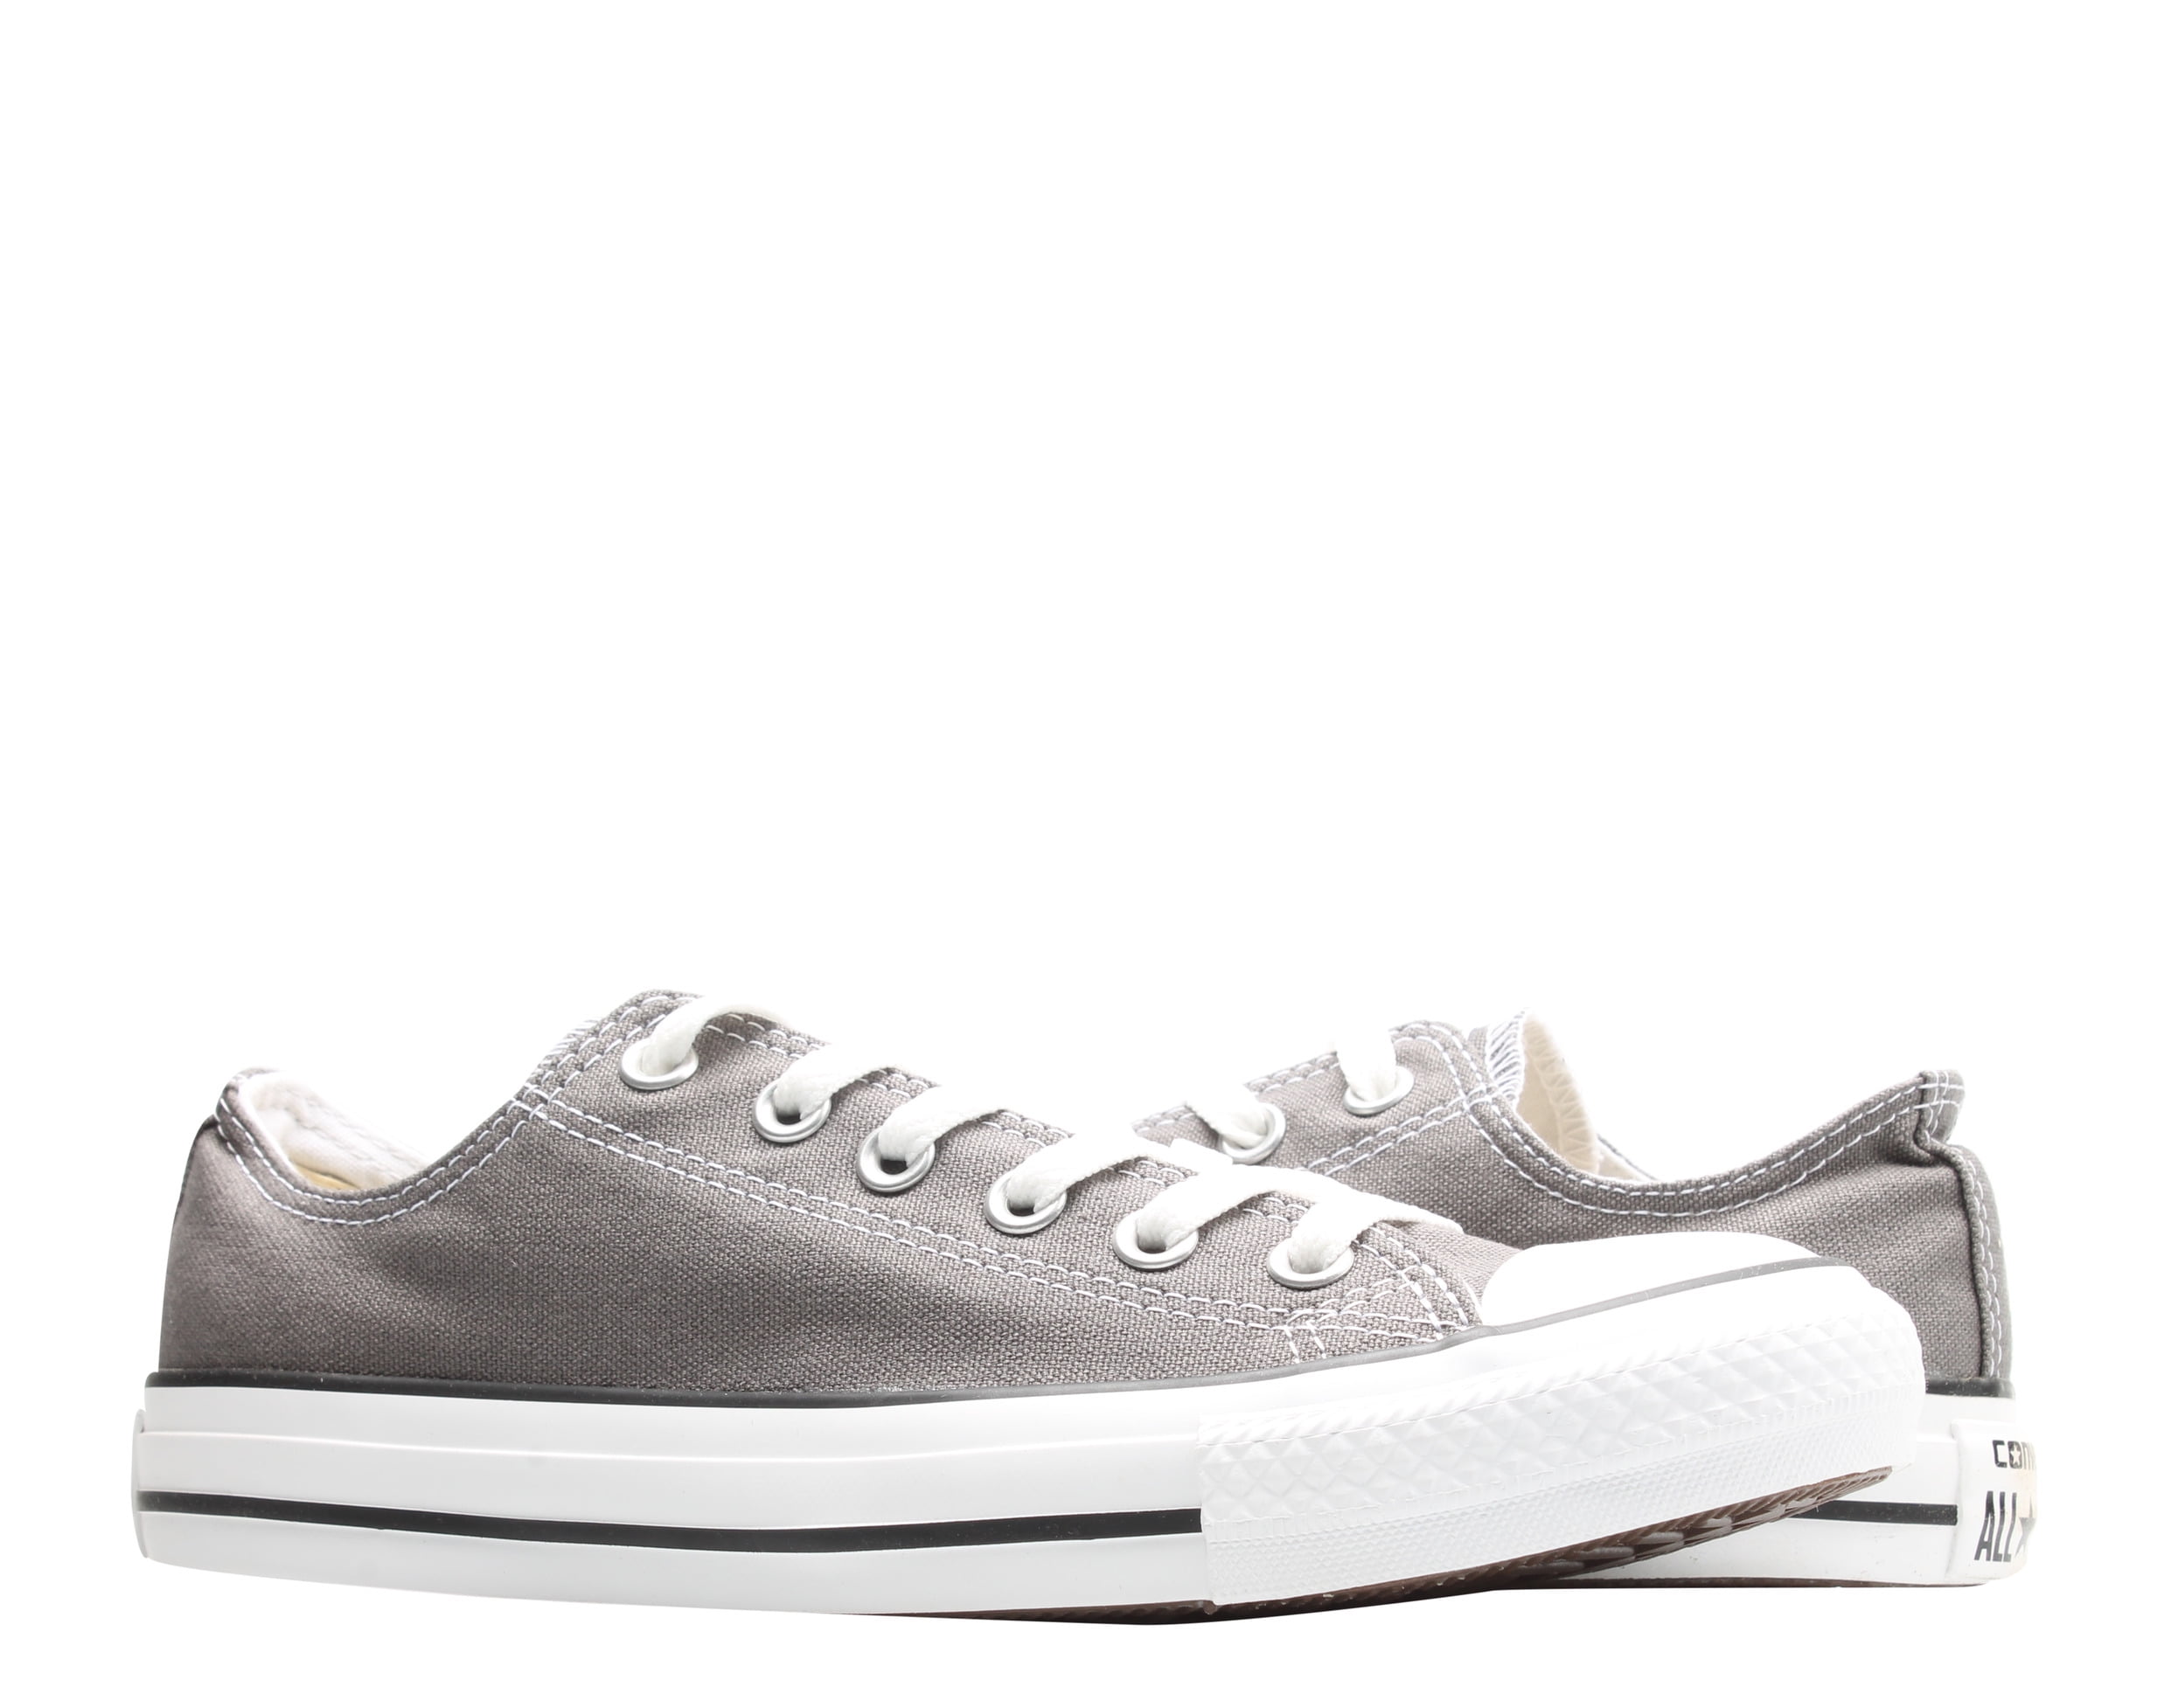 Converse Chuck Taylor All Stars Ox Shoes - Charcoal